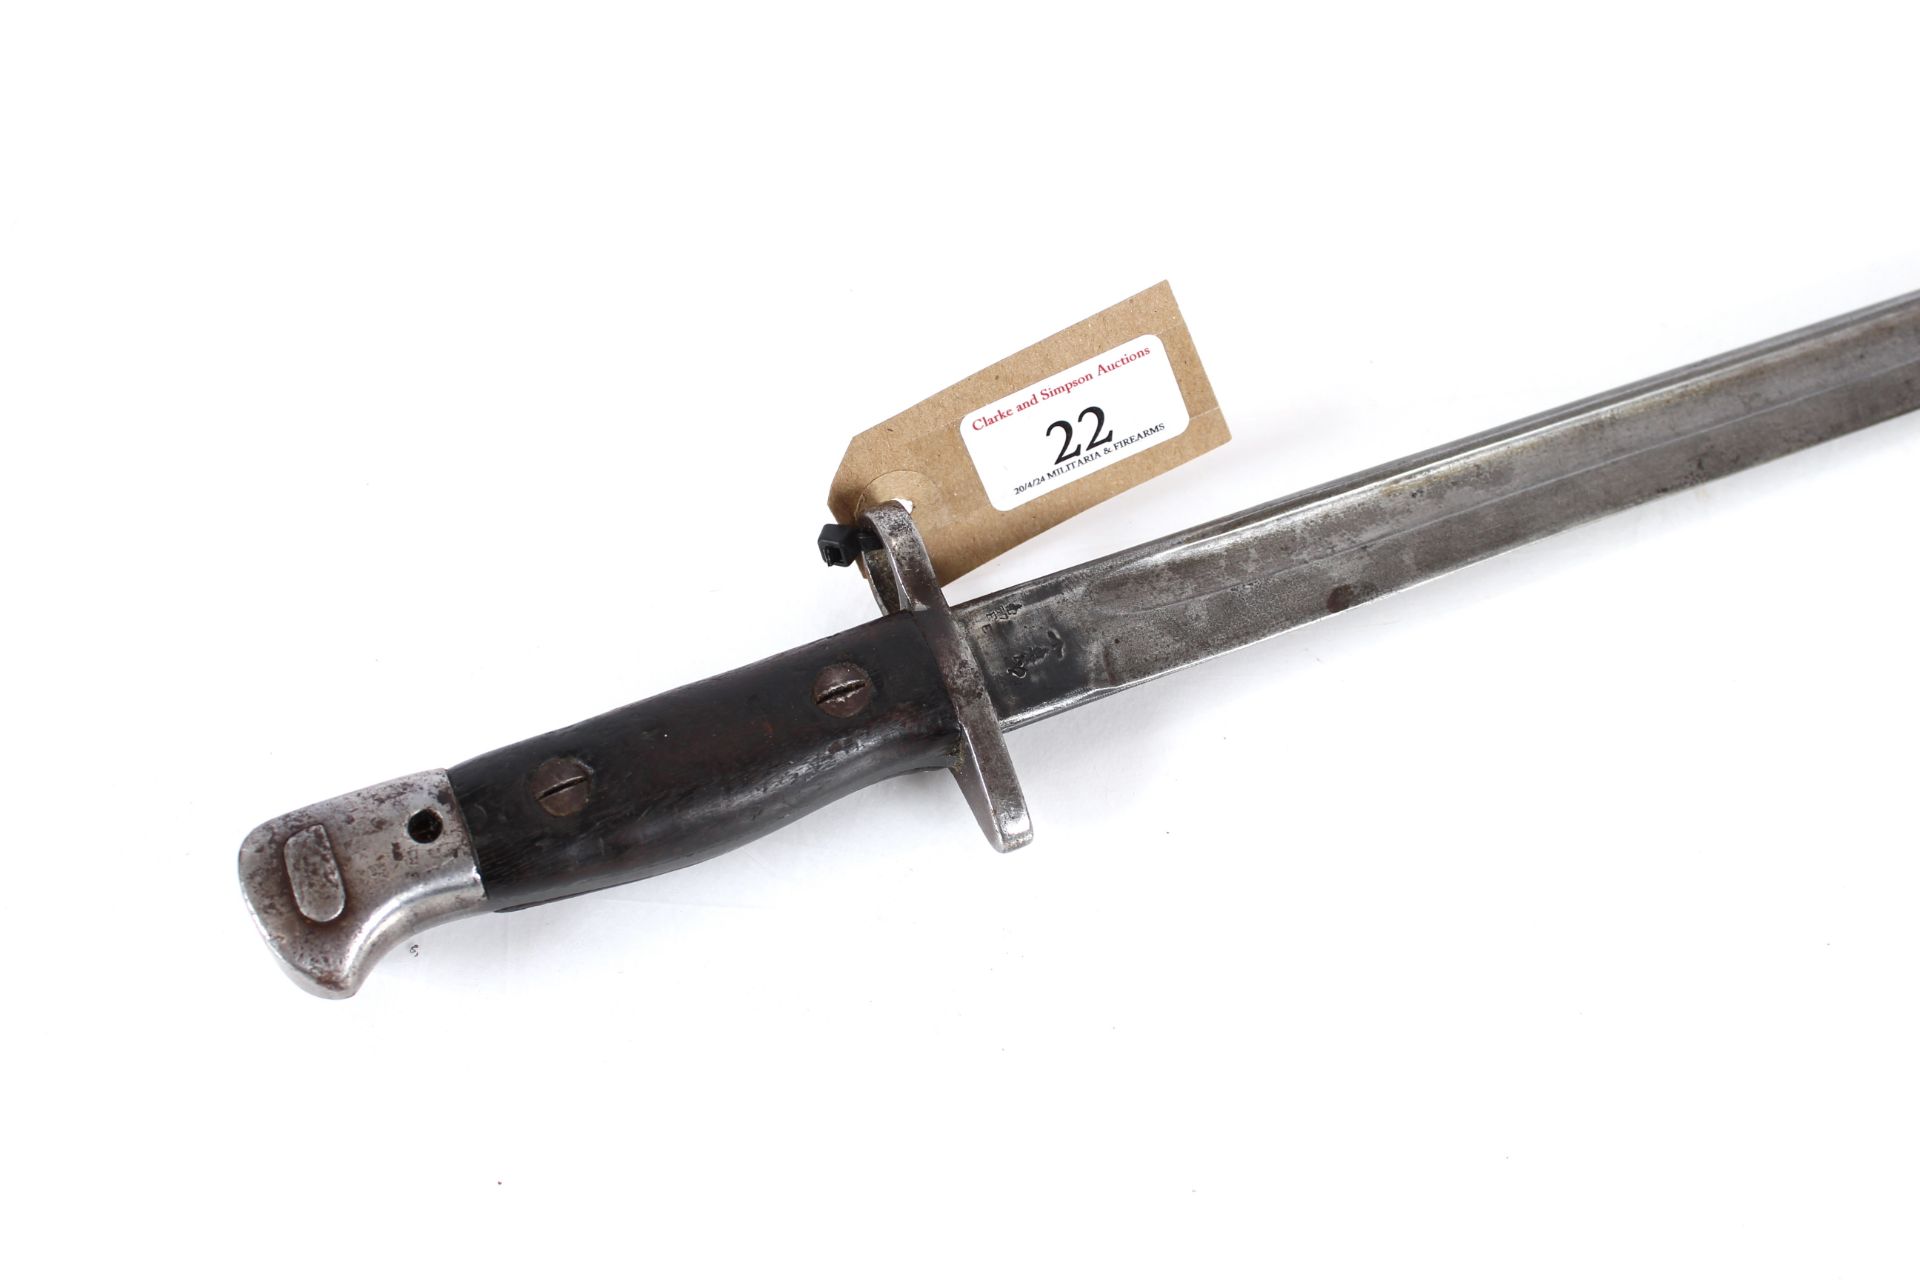 A British model 1907 bayonet and scabbard by Wilki - Image 2 of 9